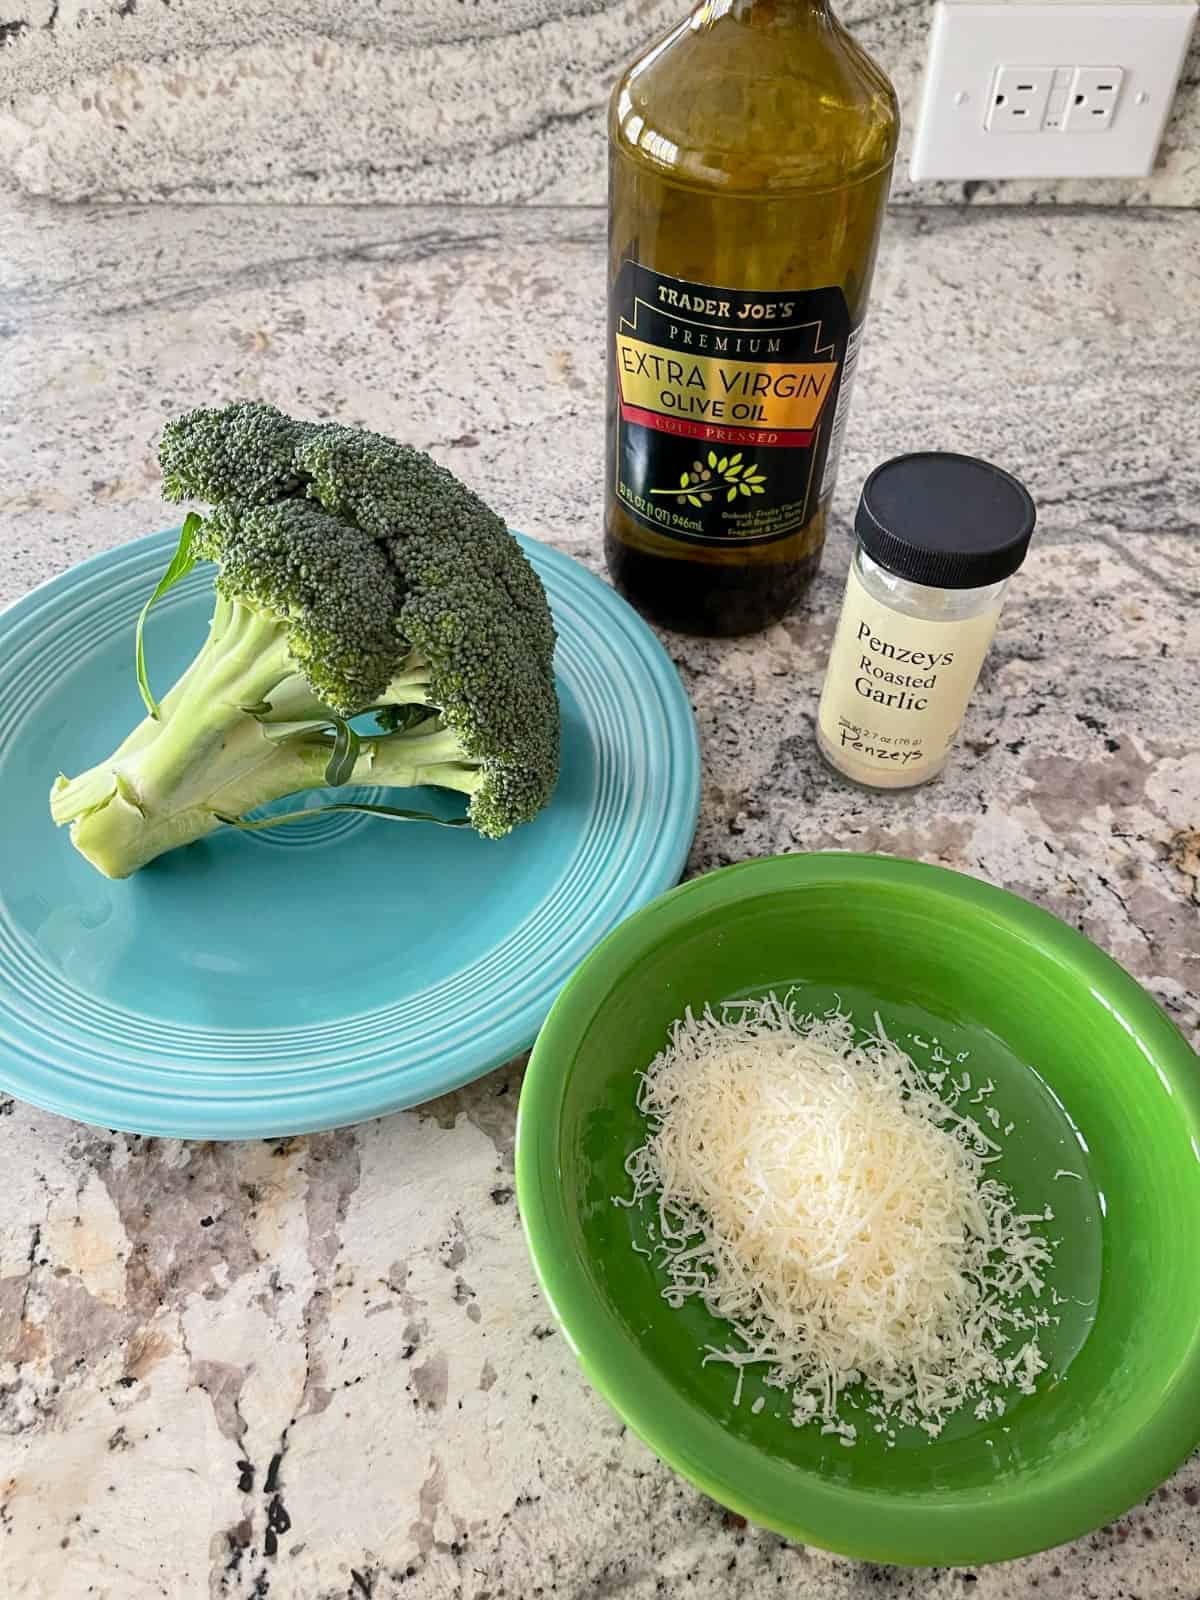 Ingredients including grated Parmesan cheese, head of broccoli, garlic powder and extra virgin olive oil on granite.